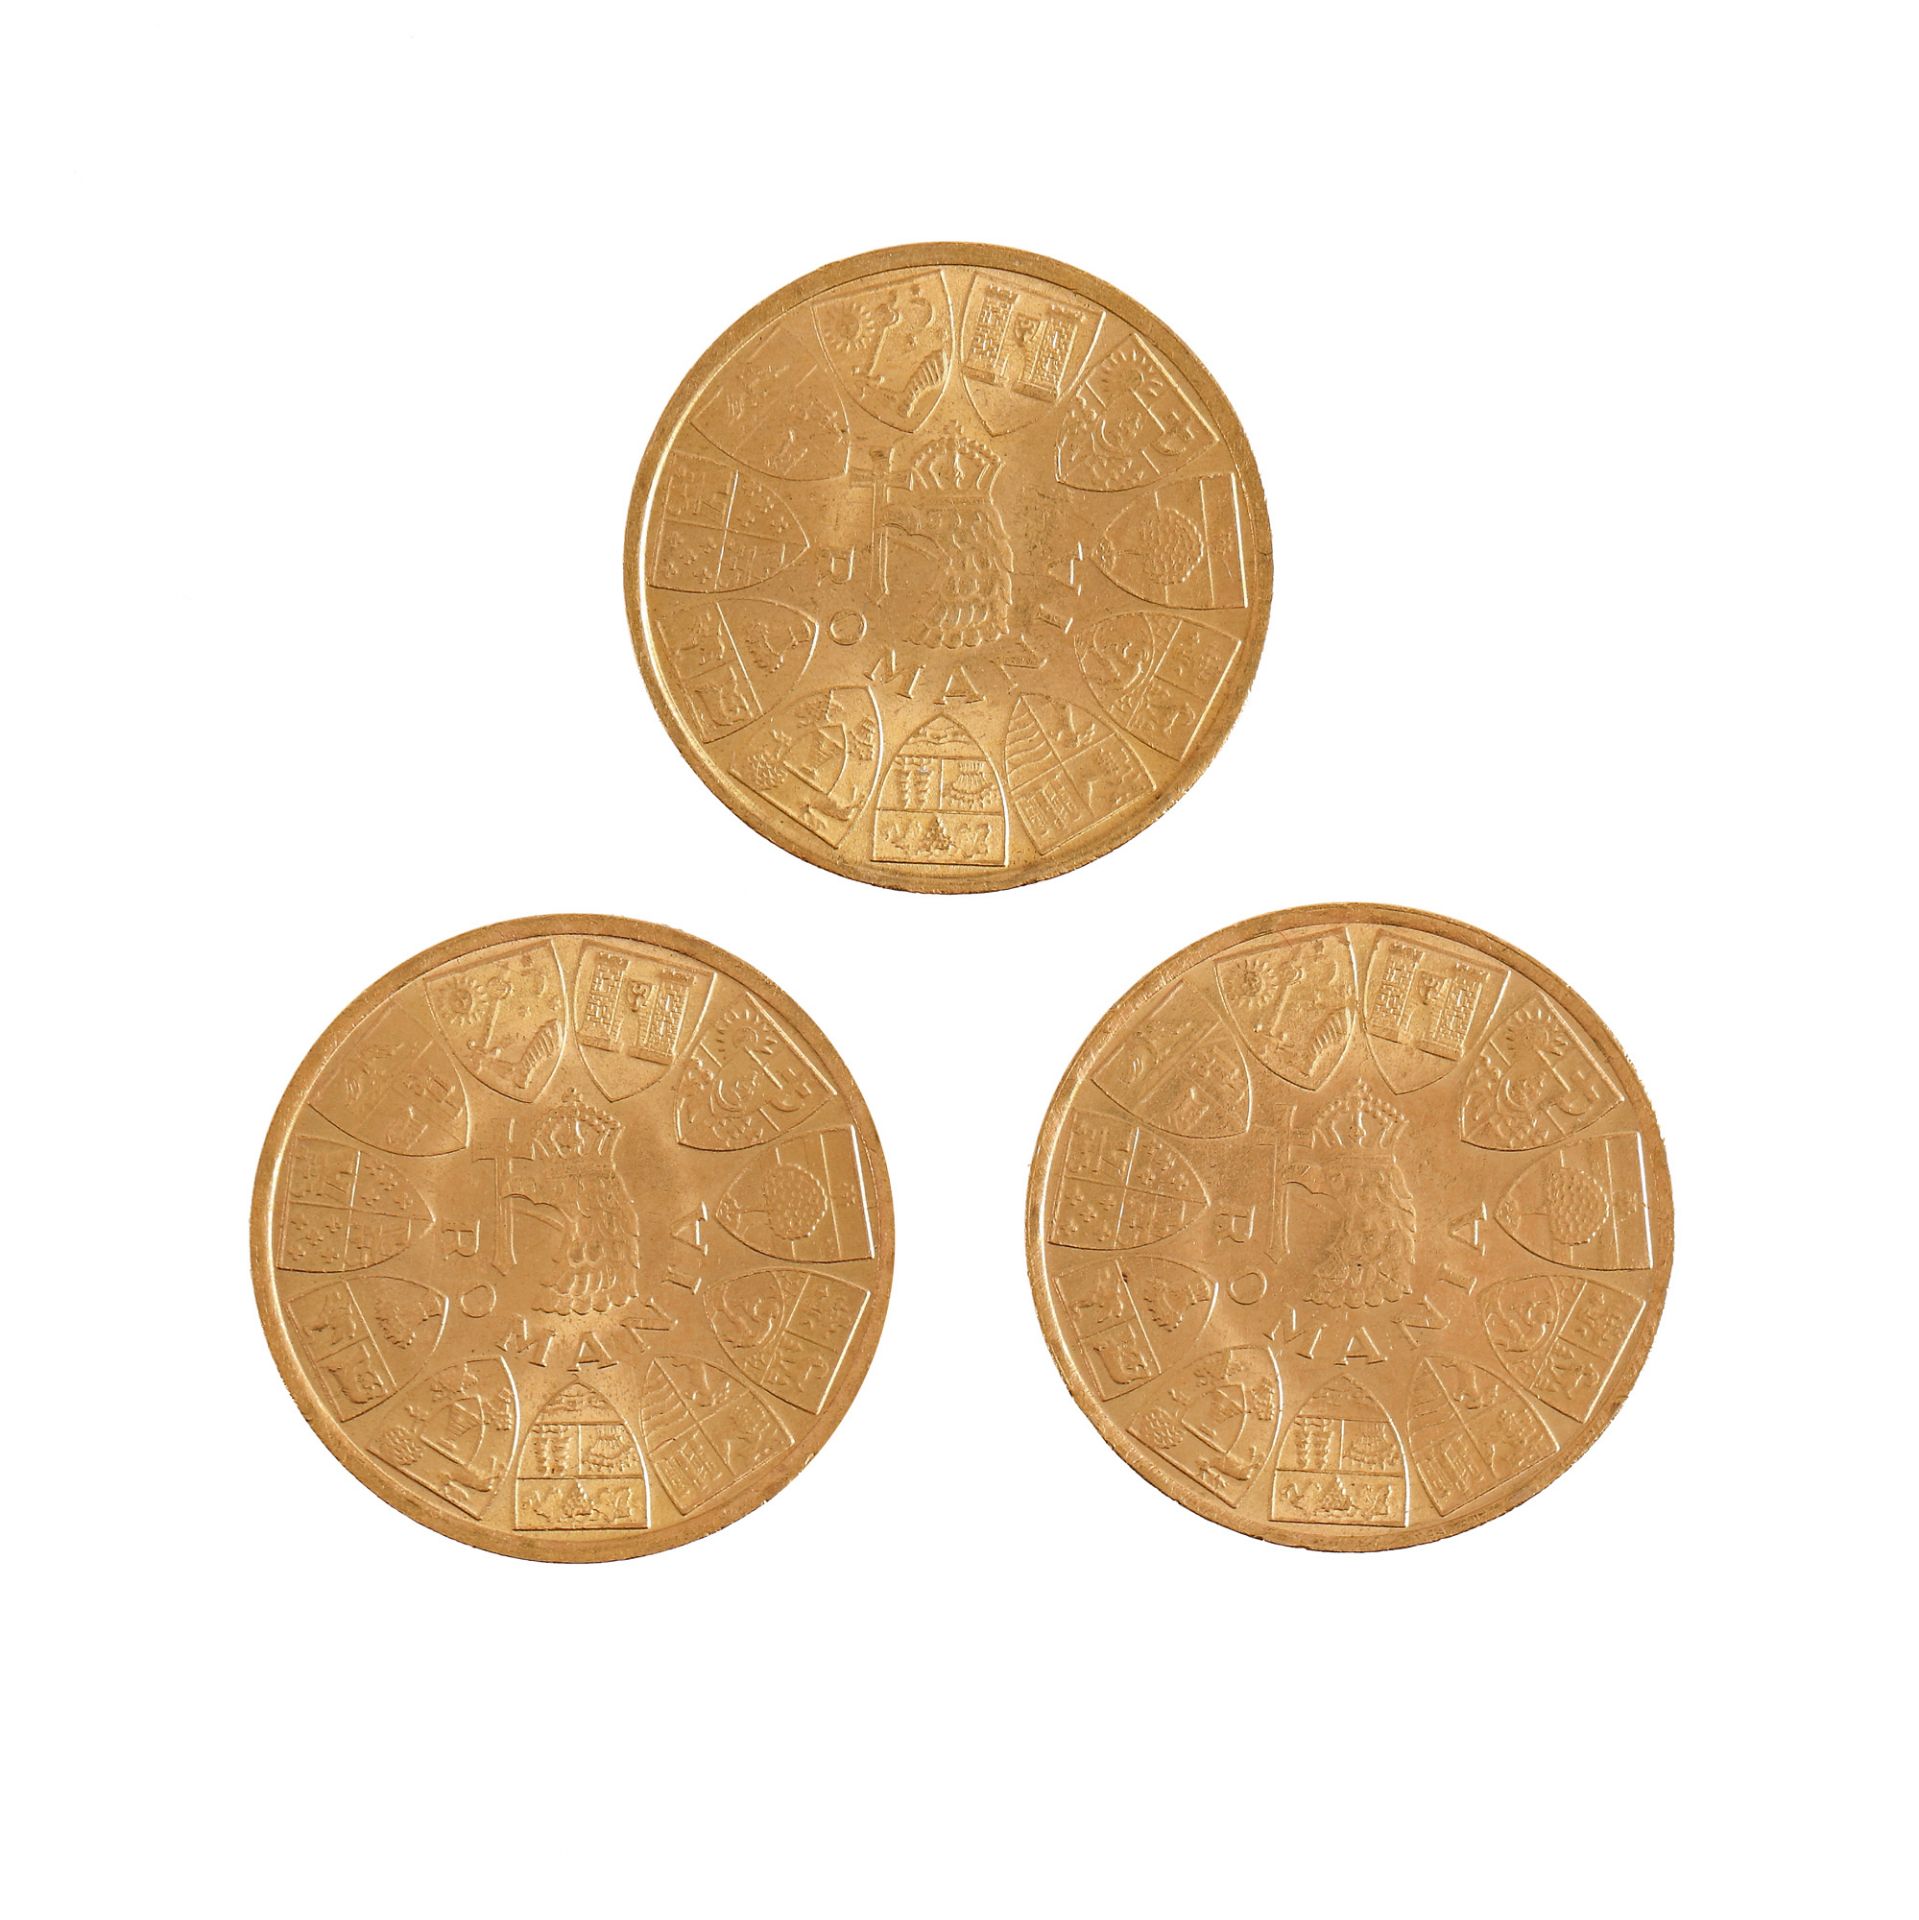 Lot consisting of three gold jubilee medals "Ardealul Nostru" ("Our Transylvania"), 1945 - Image 2 of 2